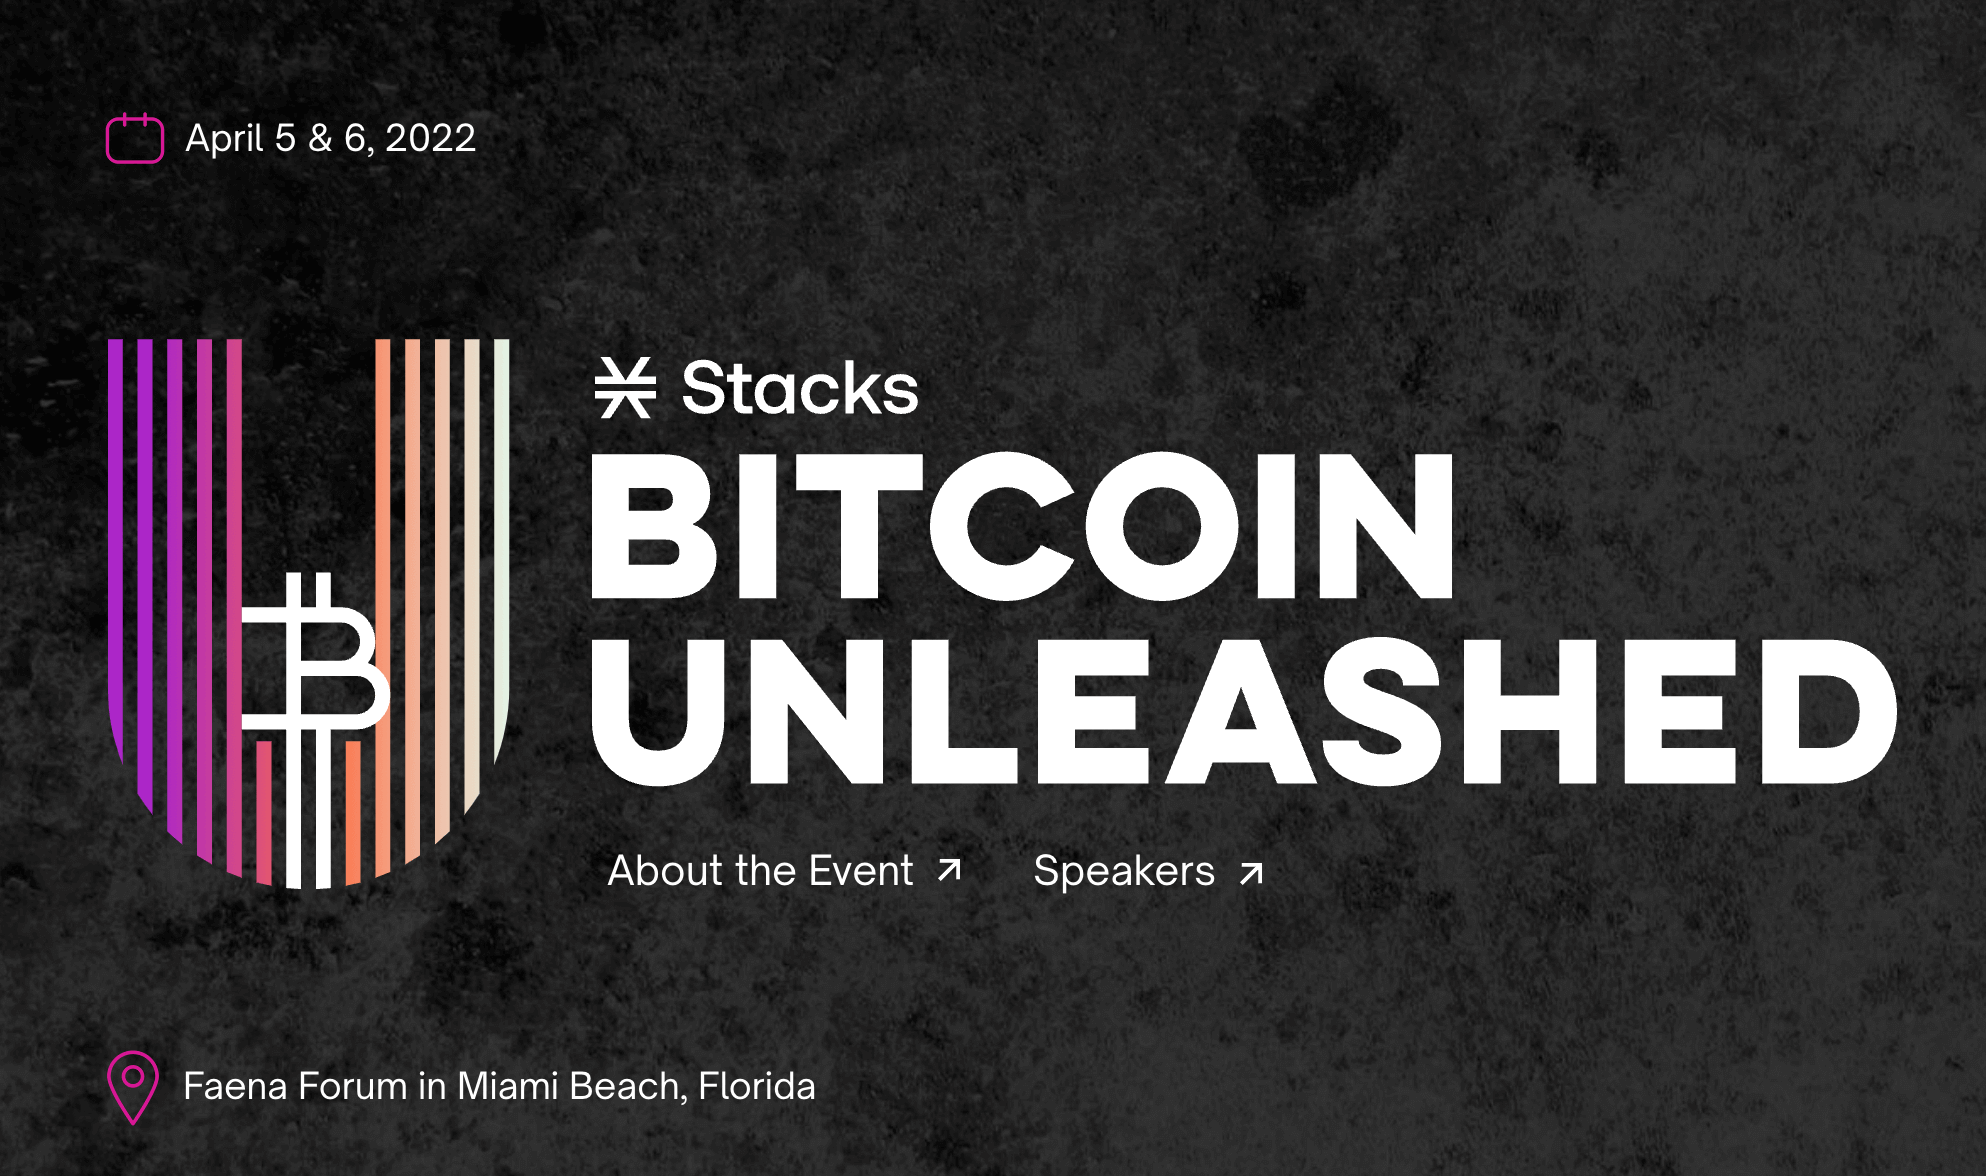 Bitcoin Unleashed Event Image